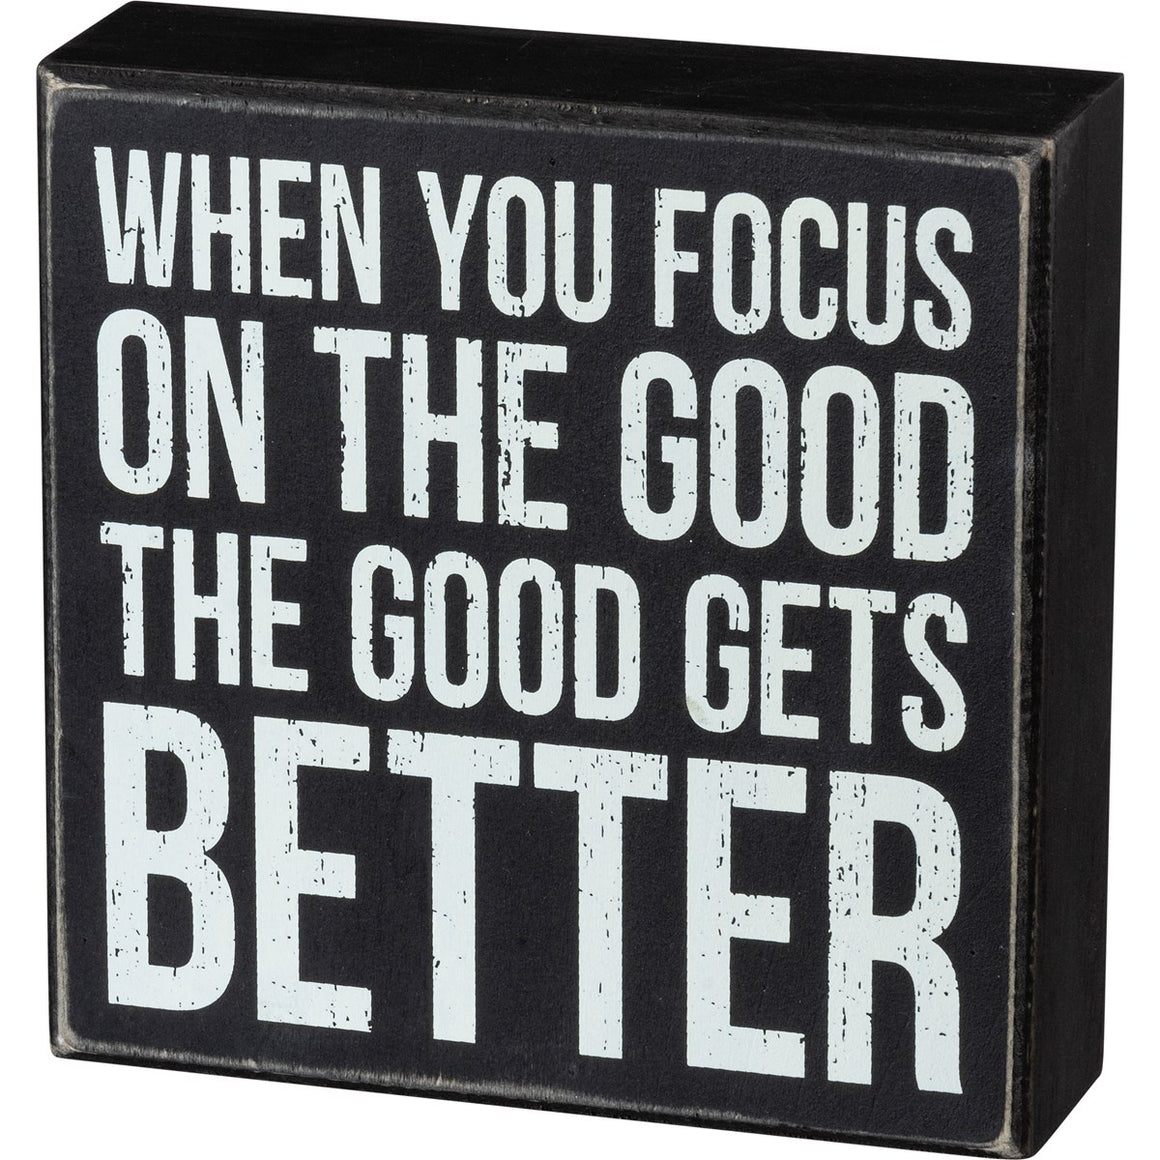 When You Focus On The Good The Good Gets Better Box Sign